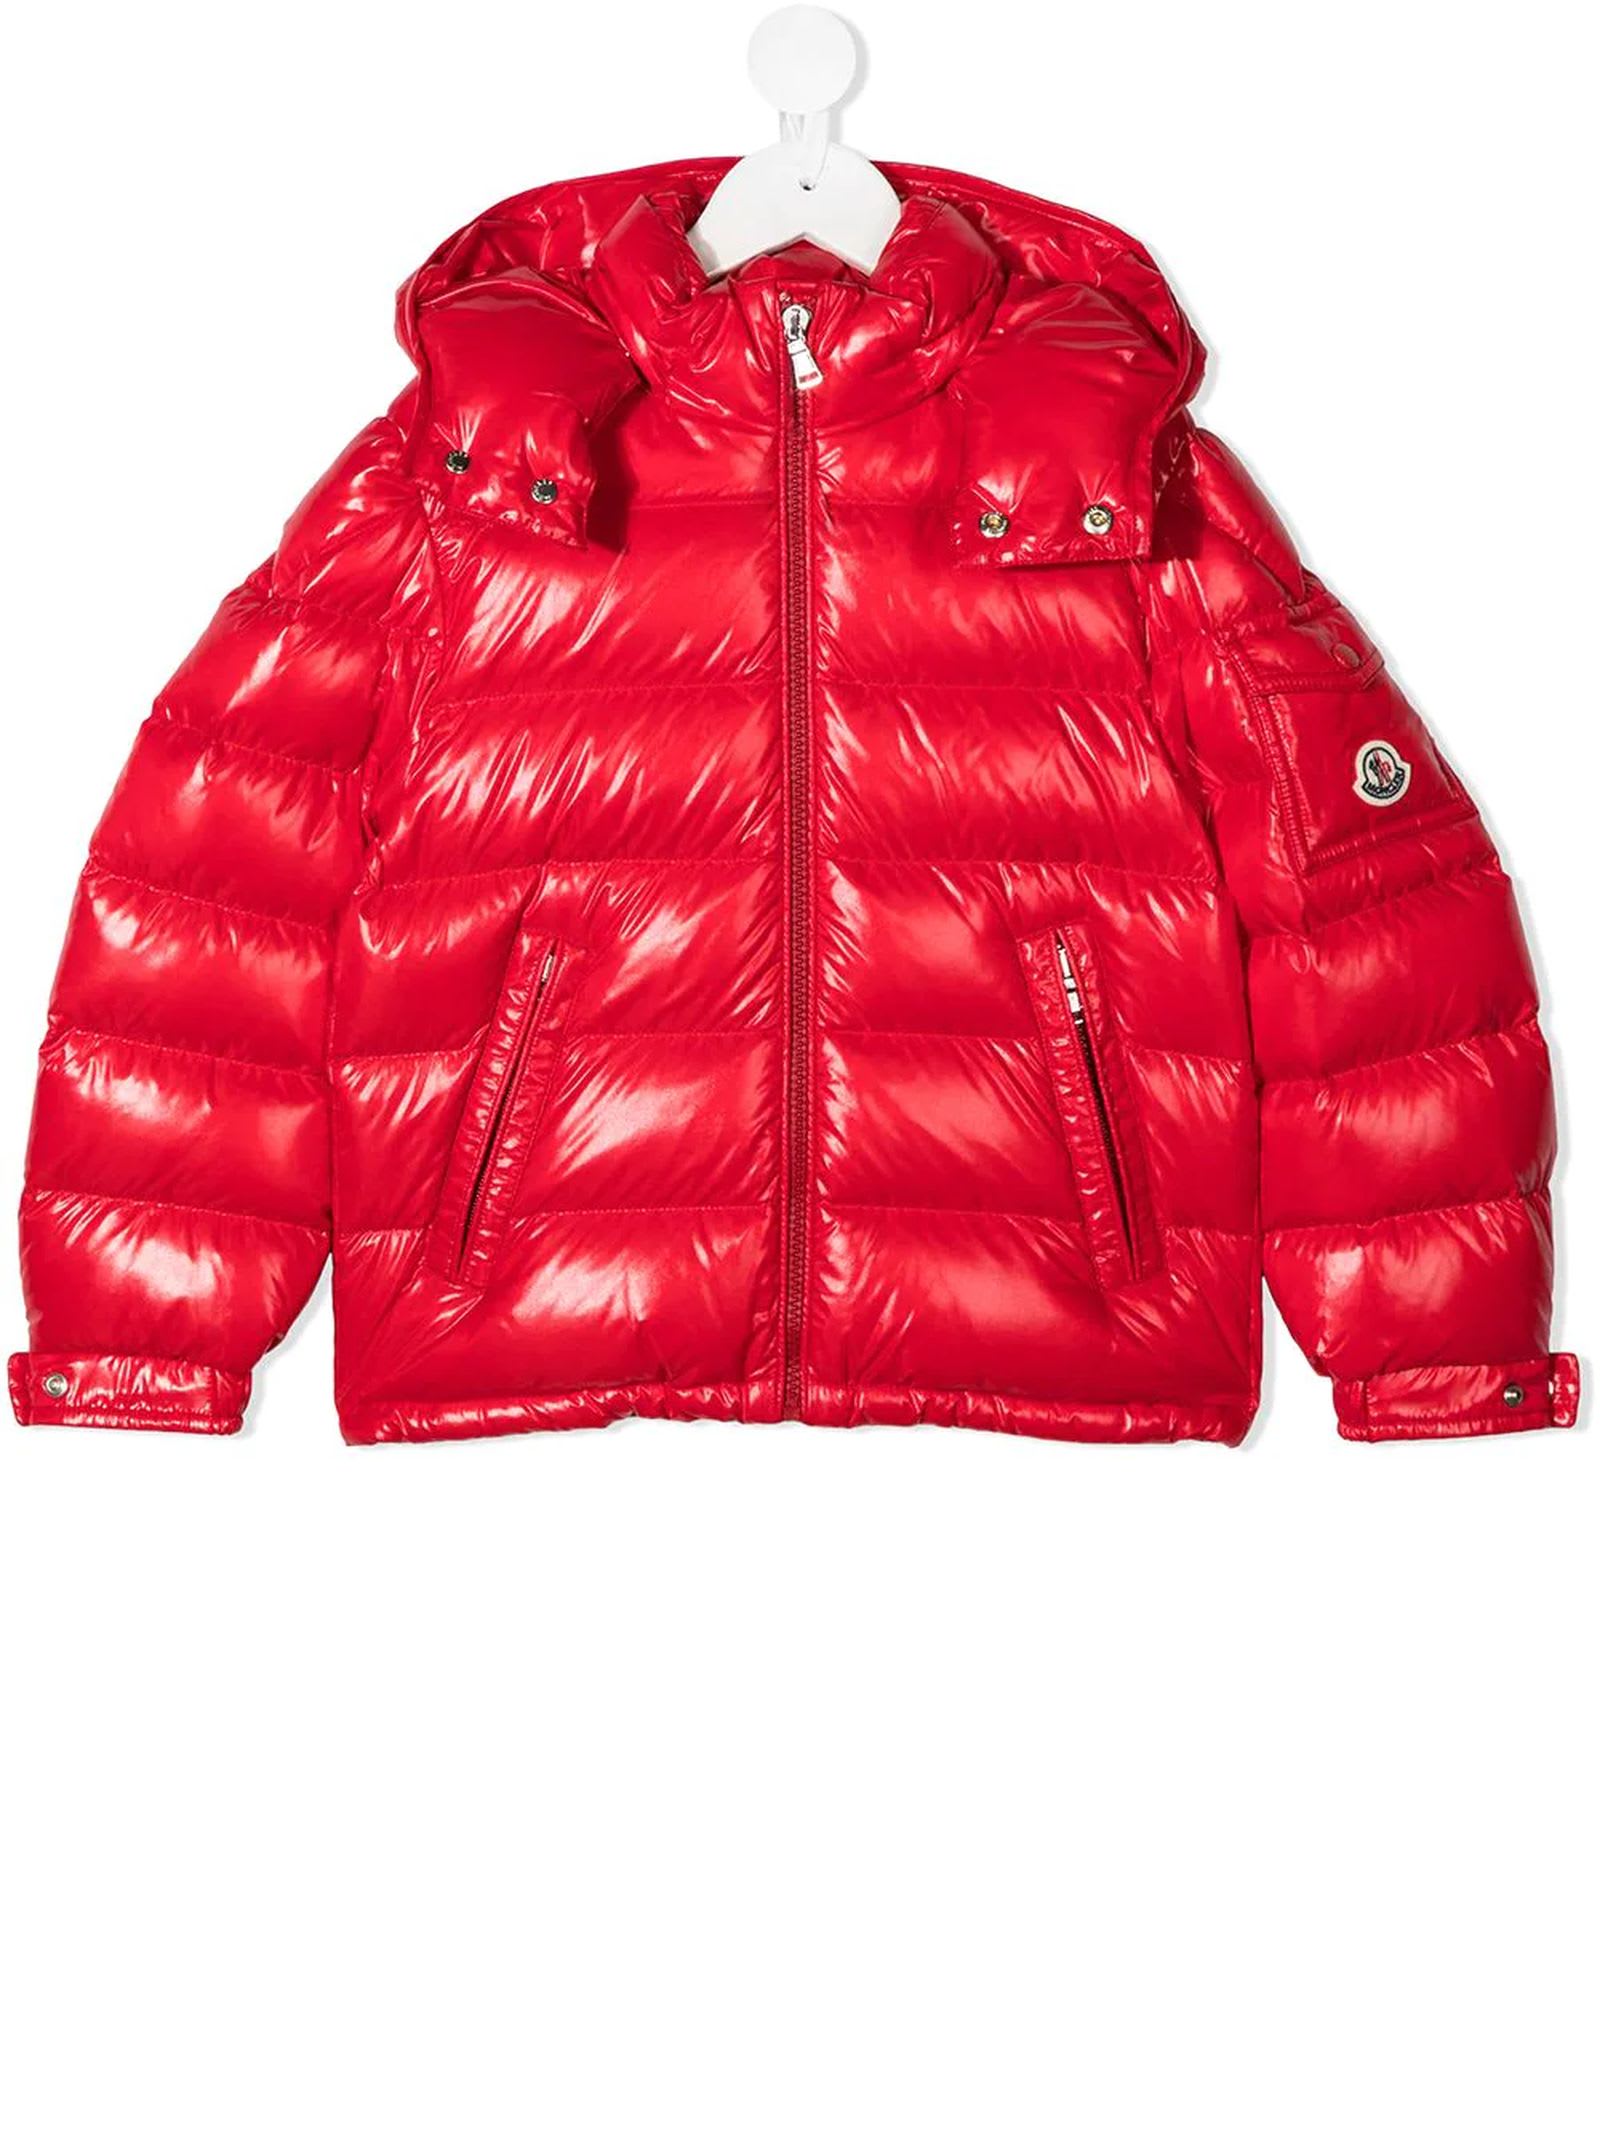 MONCLER RED GLOSSY PUFFER COAT